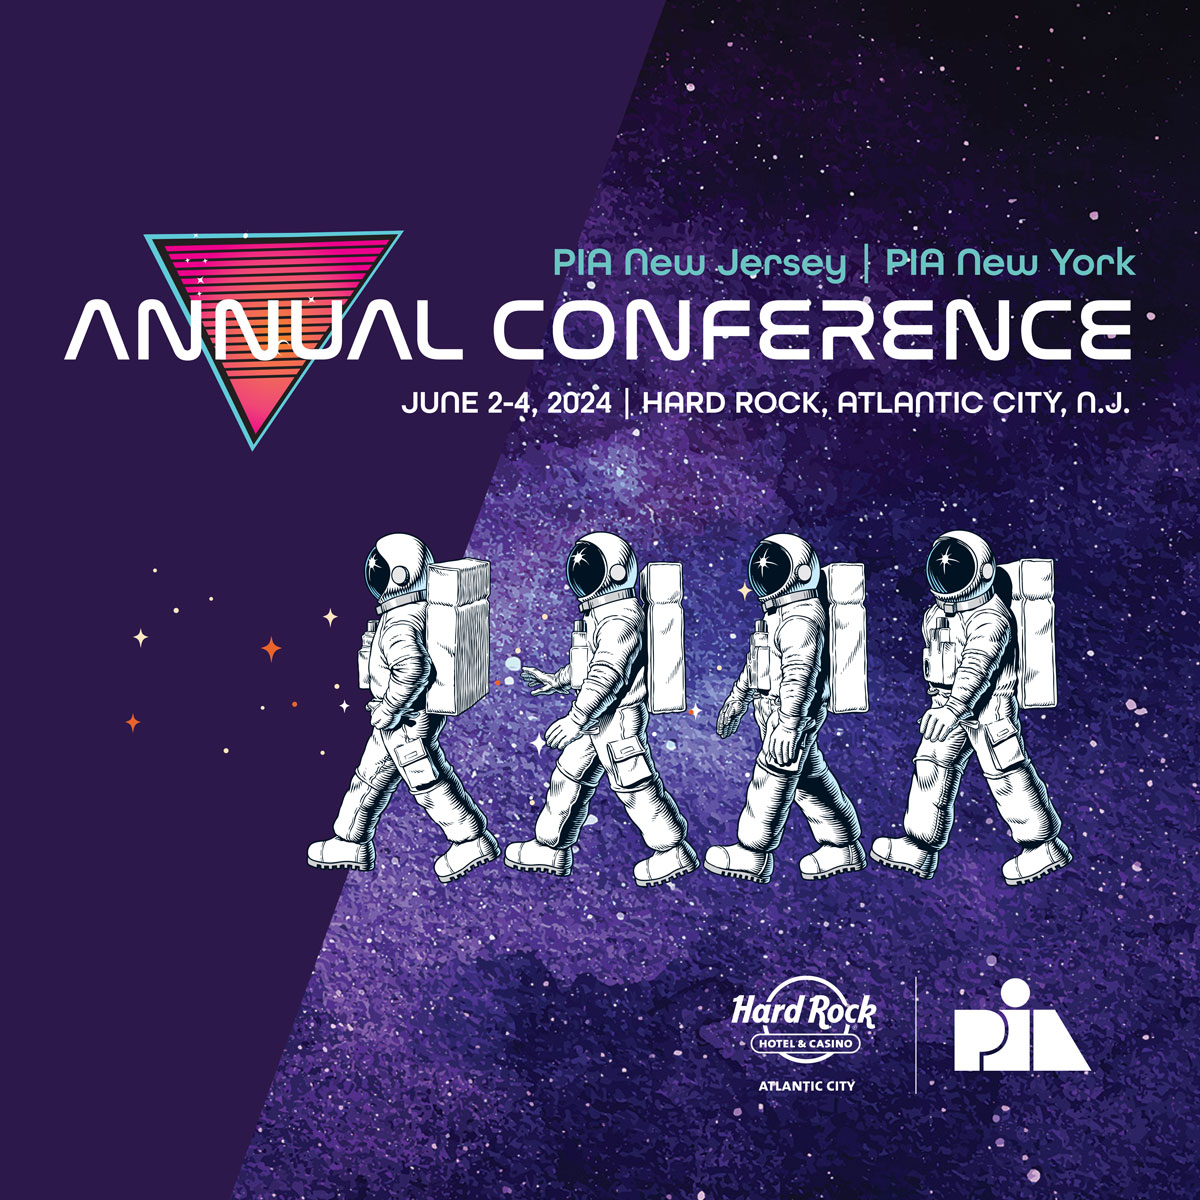 👨‍🚀 Cosmic insurance agents: In honor of International Day of Human Space Flight, plan to skyrocket your career at PIA's 2024 Annual Conference—get tickets today for our best rate! 🚀 Stellar networking opportunities and out-of-this-world vendors await! loom.ly/lj7DdEU